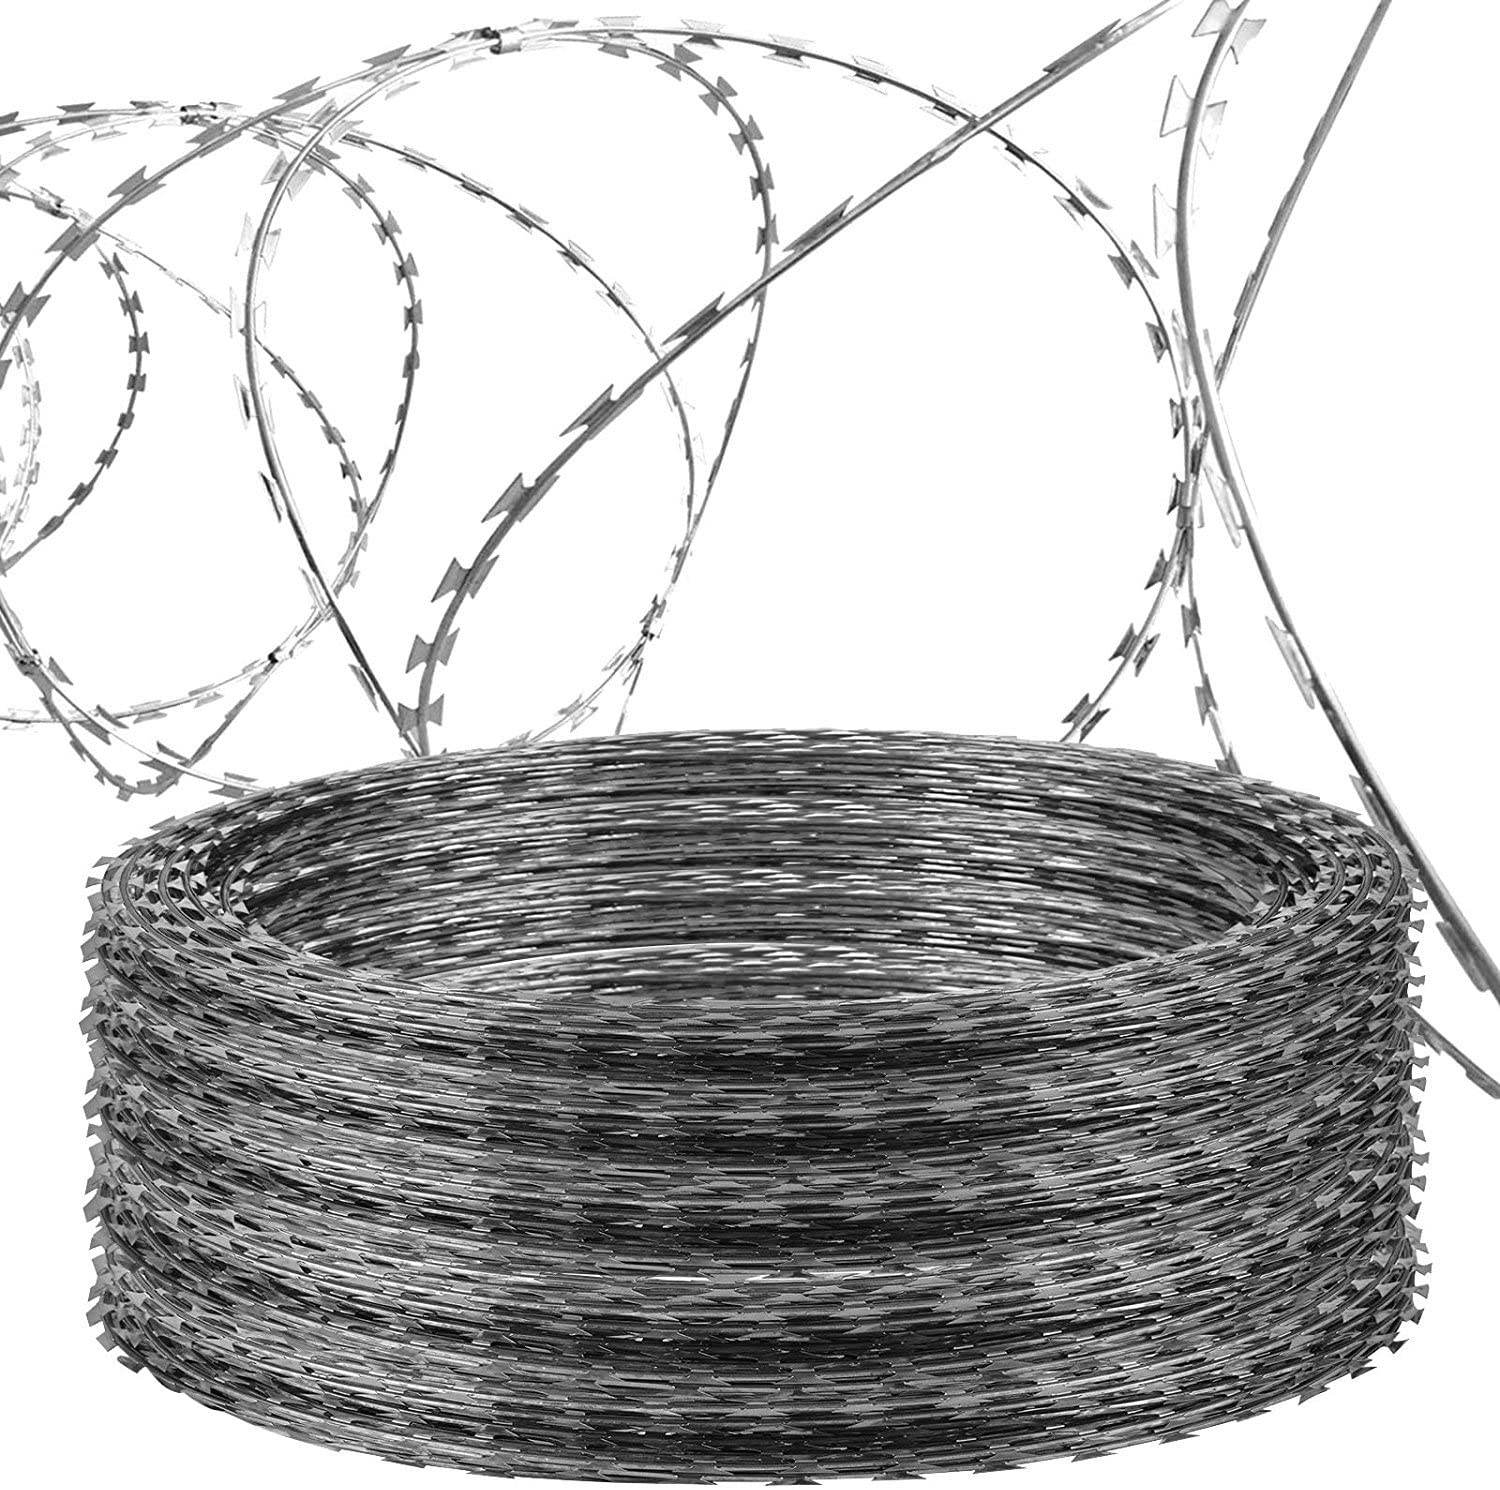 BTO-22 Galvanized Razor Wire Coils With Loops Diameter 600 mm Used On Ships For Anti-piracy